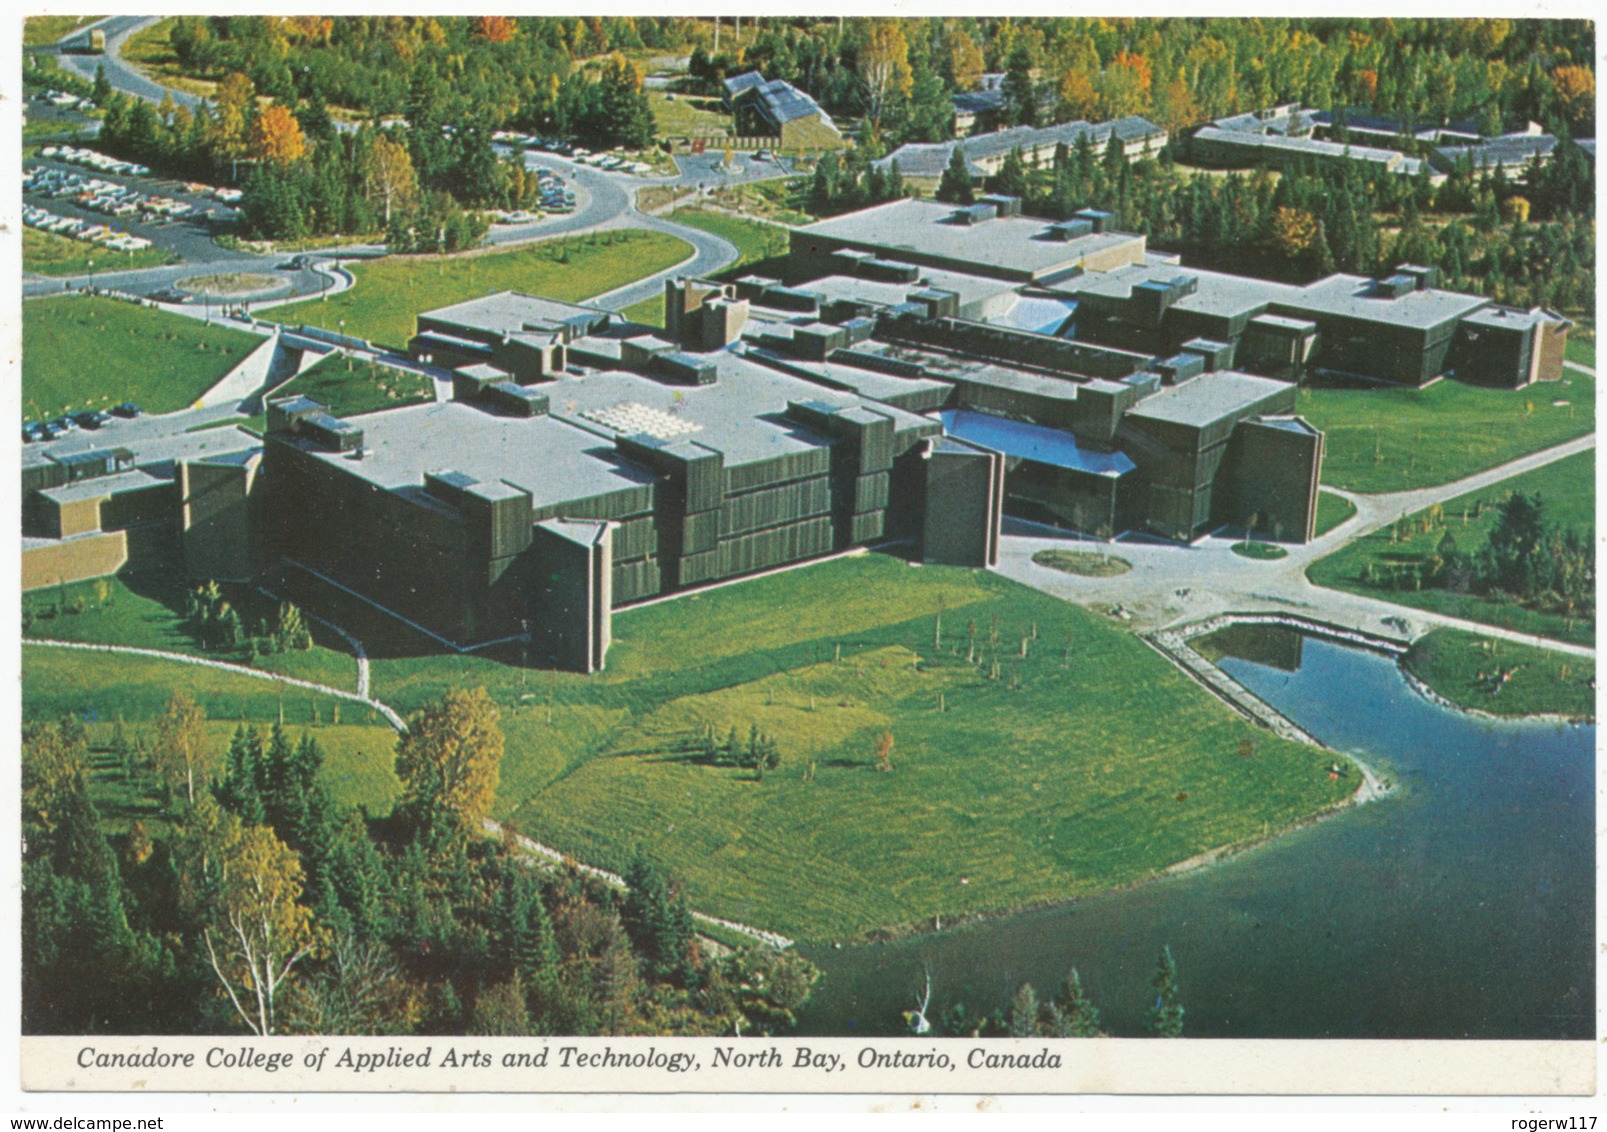 Canadore College Of Applied Arts And Technology, North Bay, Ontario, Canada - North Bay